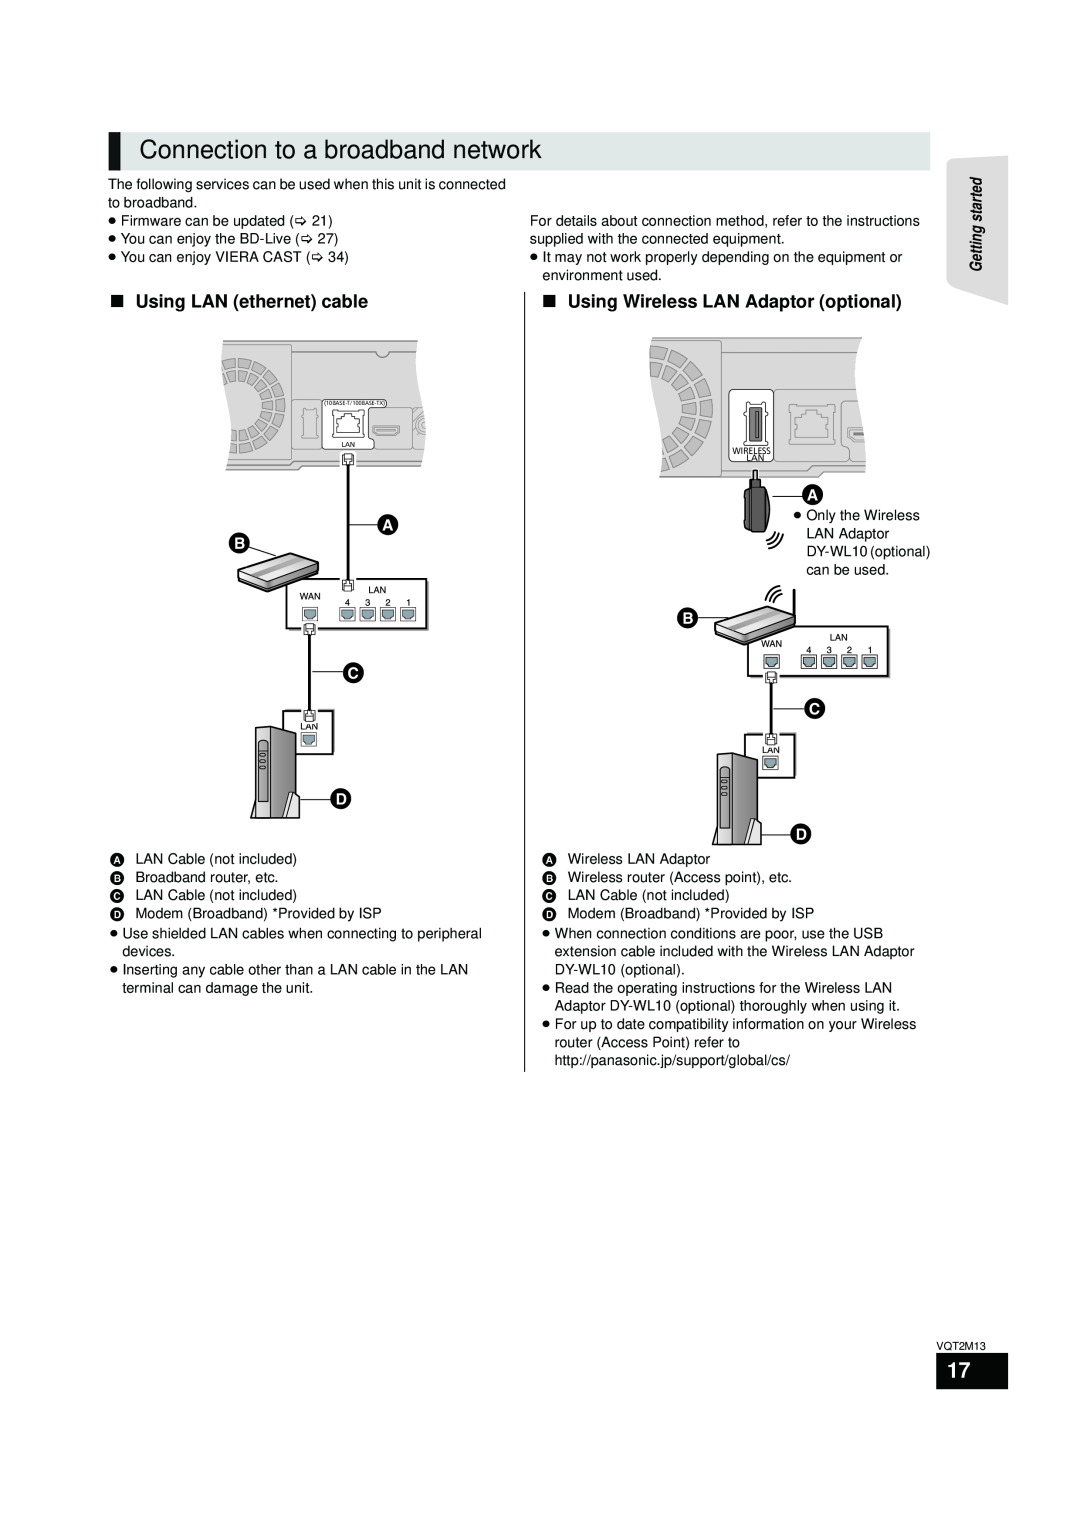 Panasonic SC-BT330, SC-BT730 operating instructions Connection to a broadband network,    , Using LAN ethernet cable 